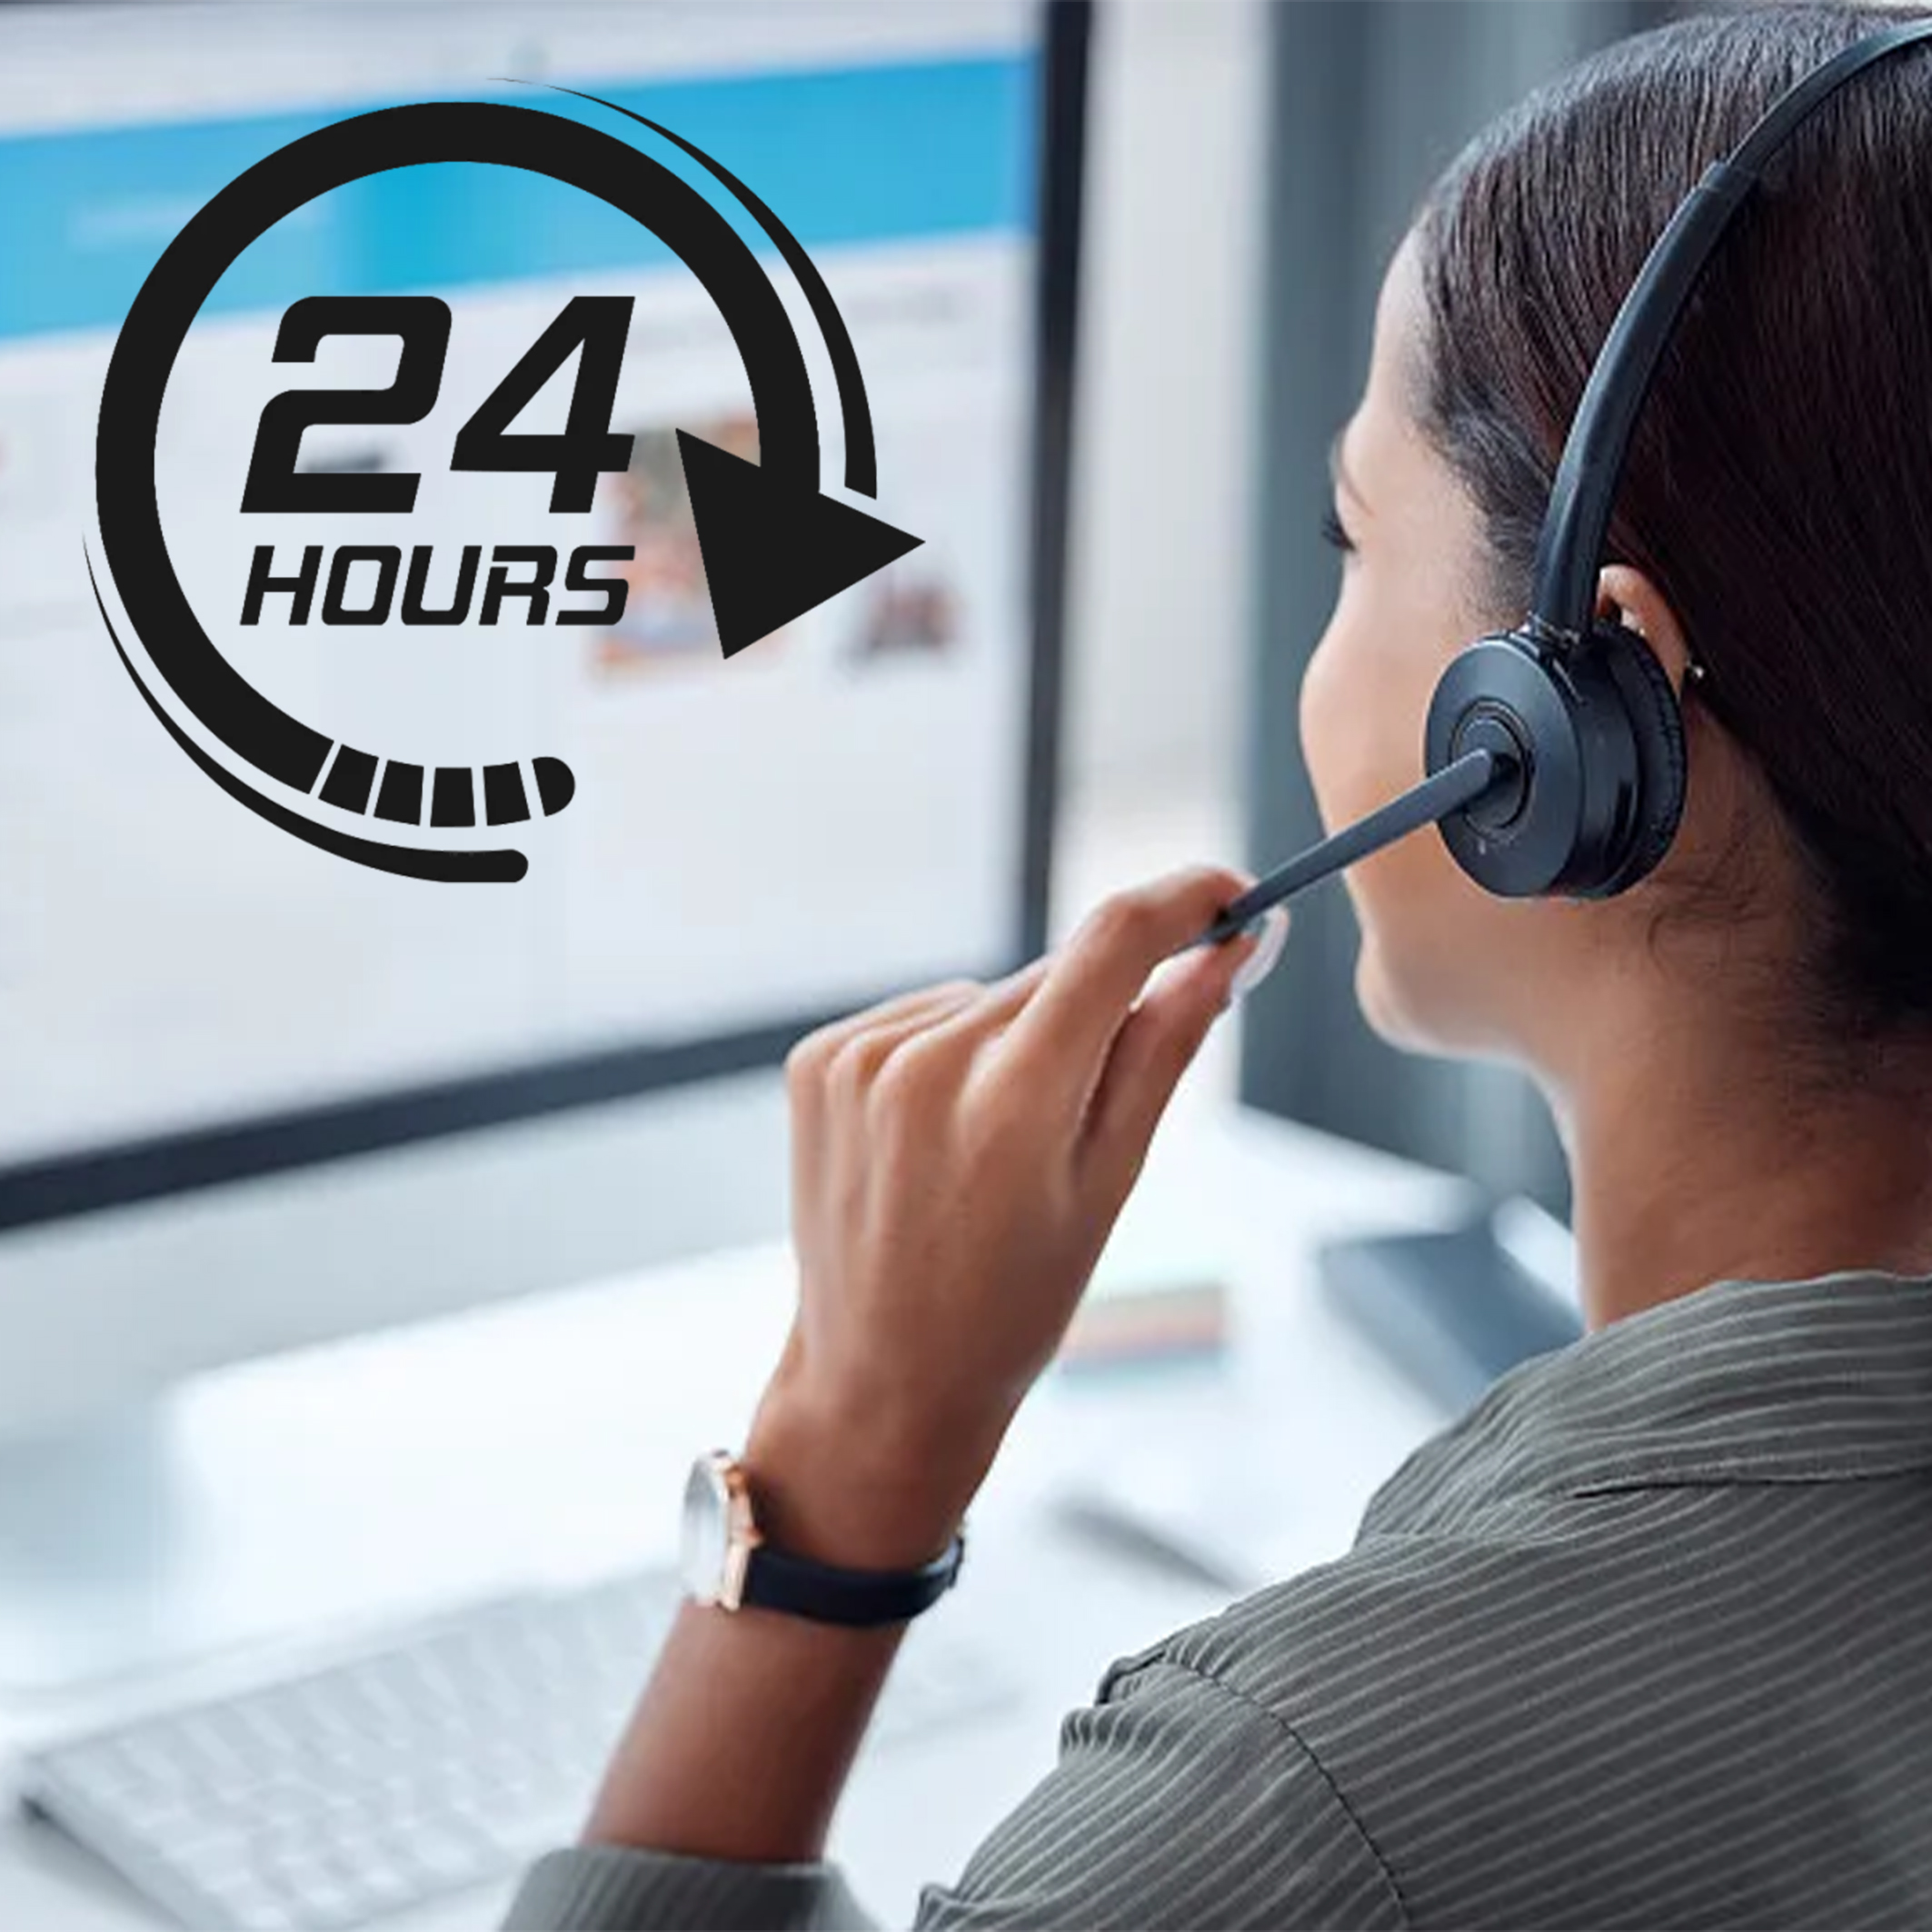 24/7 customer service available every day of the year